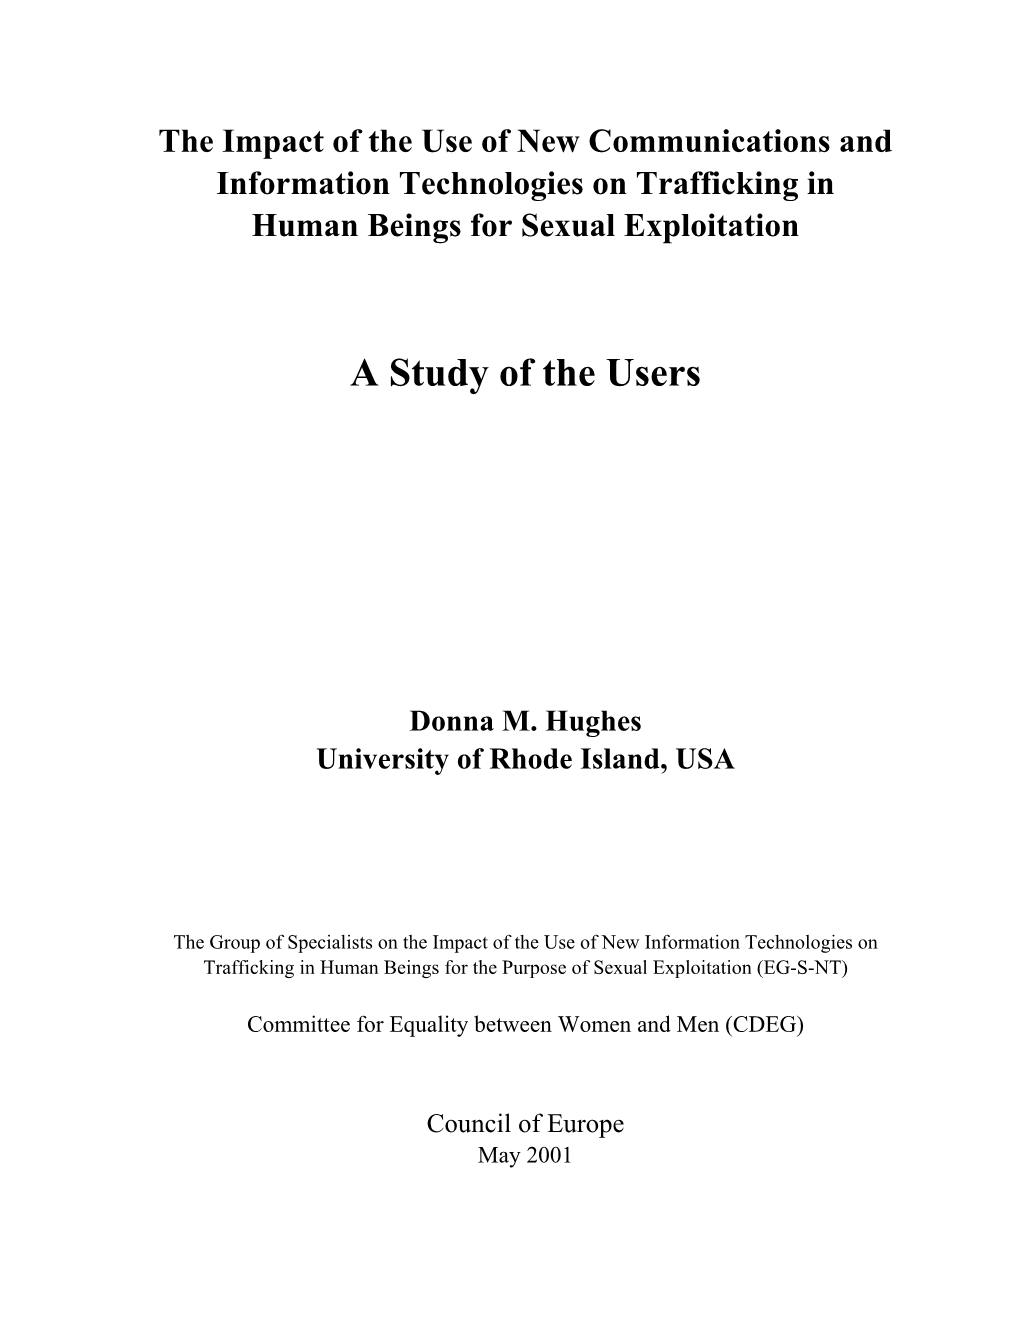 A Study of the Users